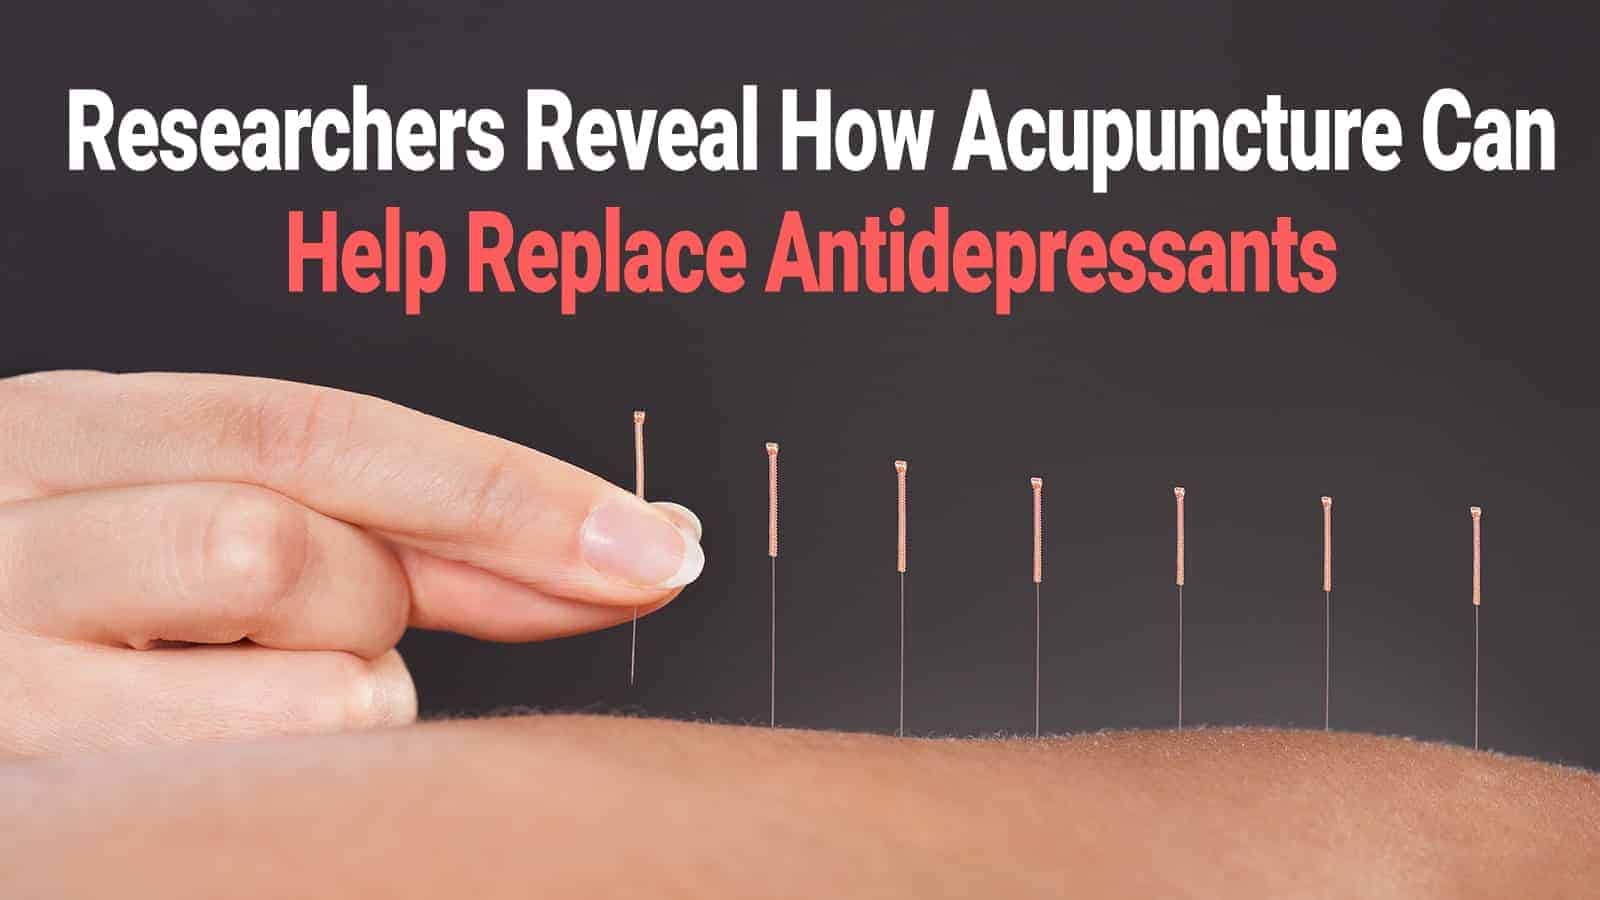 Researchers Reveal How Acupuncture Can Help Replace Antidepressants